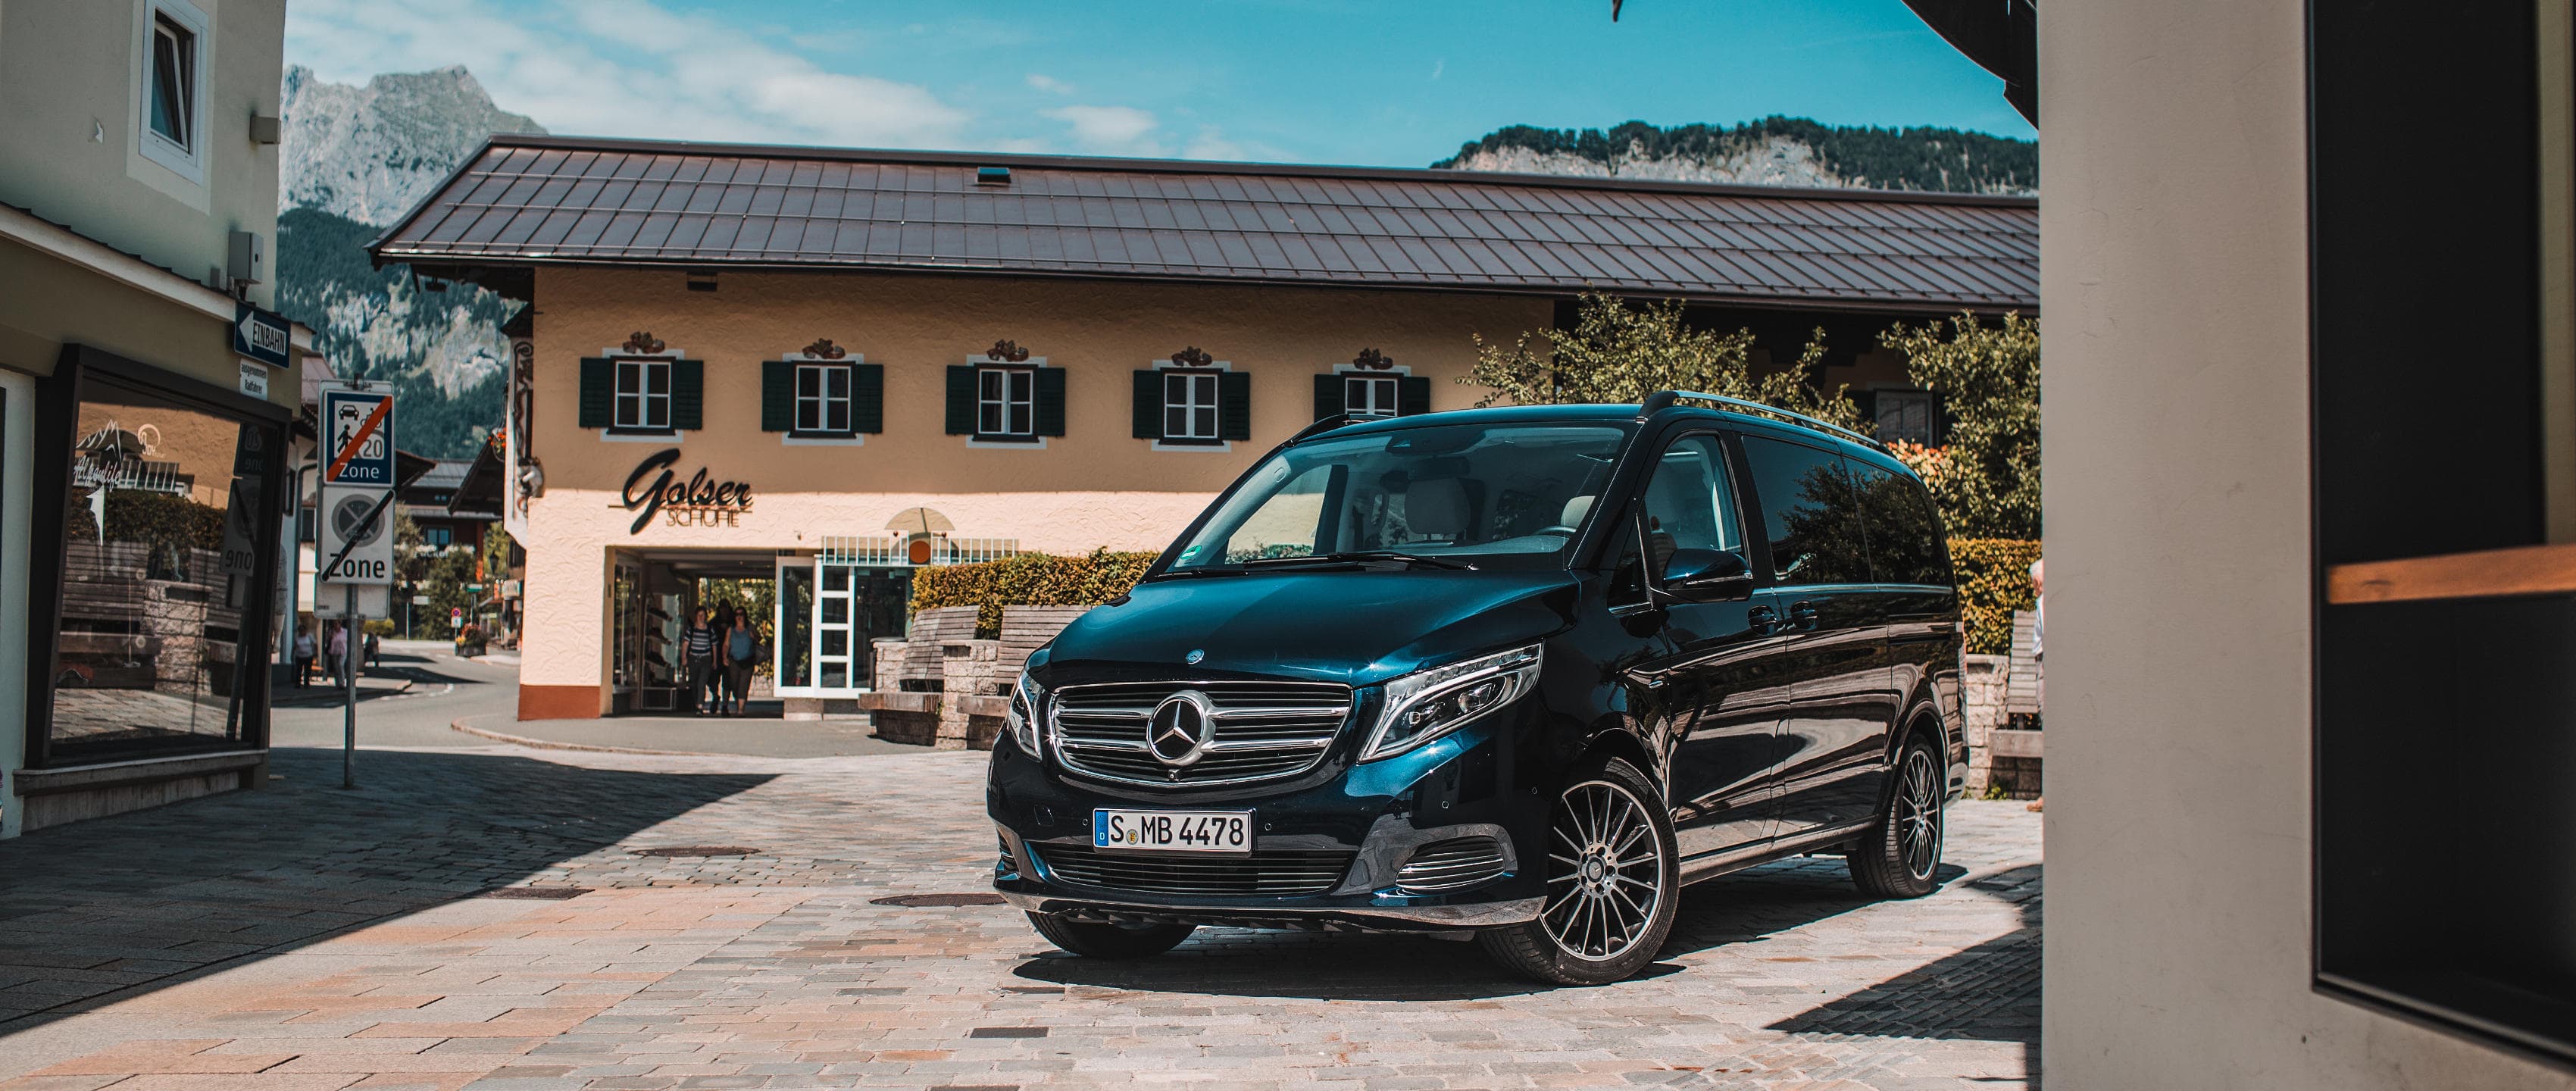 Mercedes launches its first-ever Luxury Multi-Purpose Vehicle, the V-Class